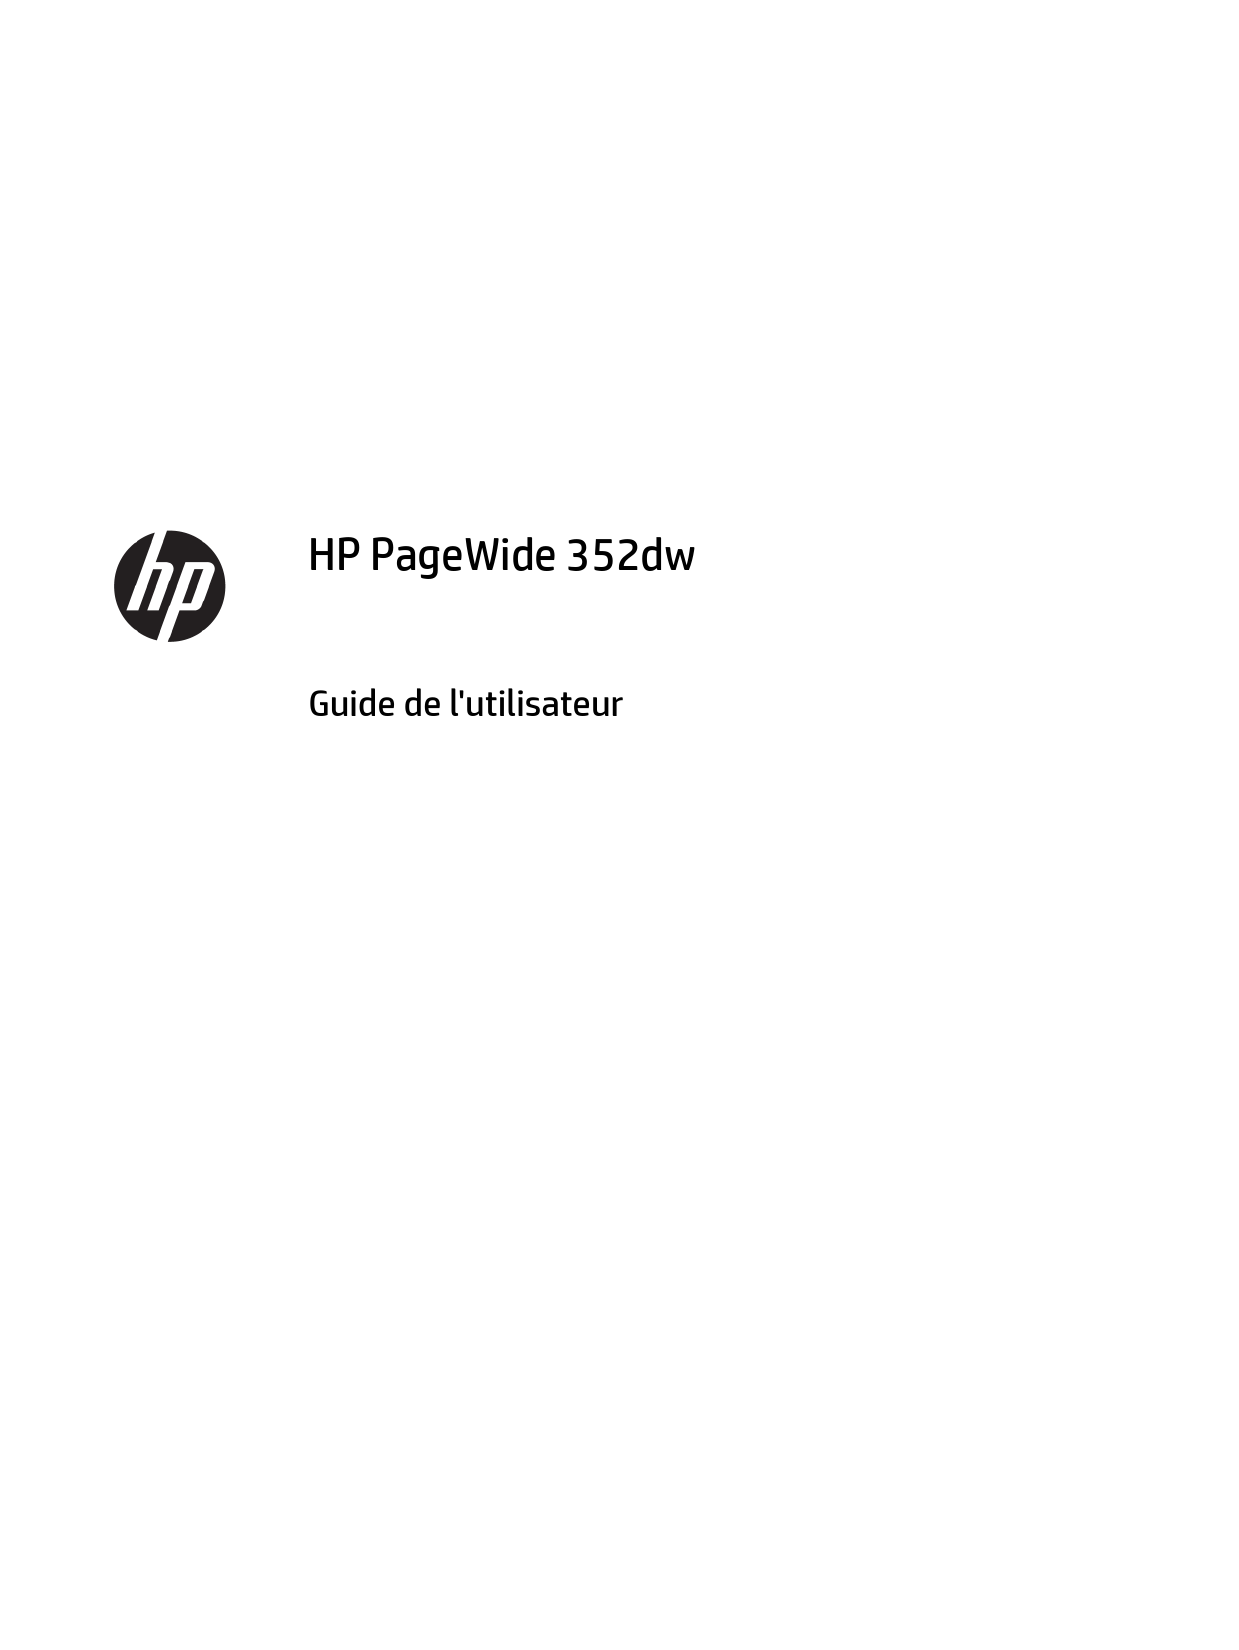 Mode d'emploi HP PAGEWIDE 352DW